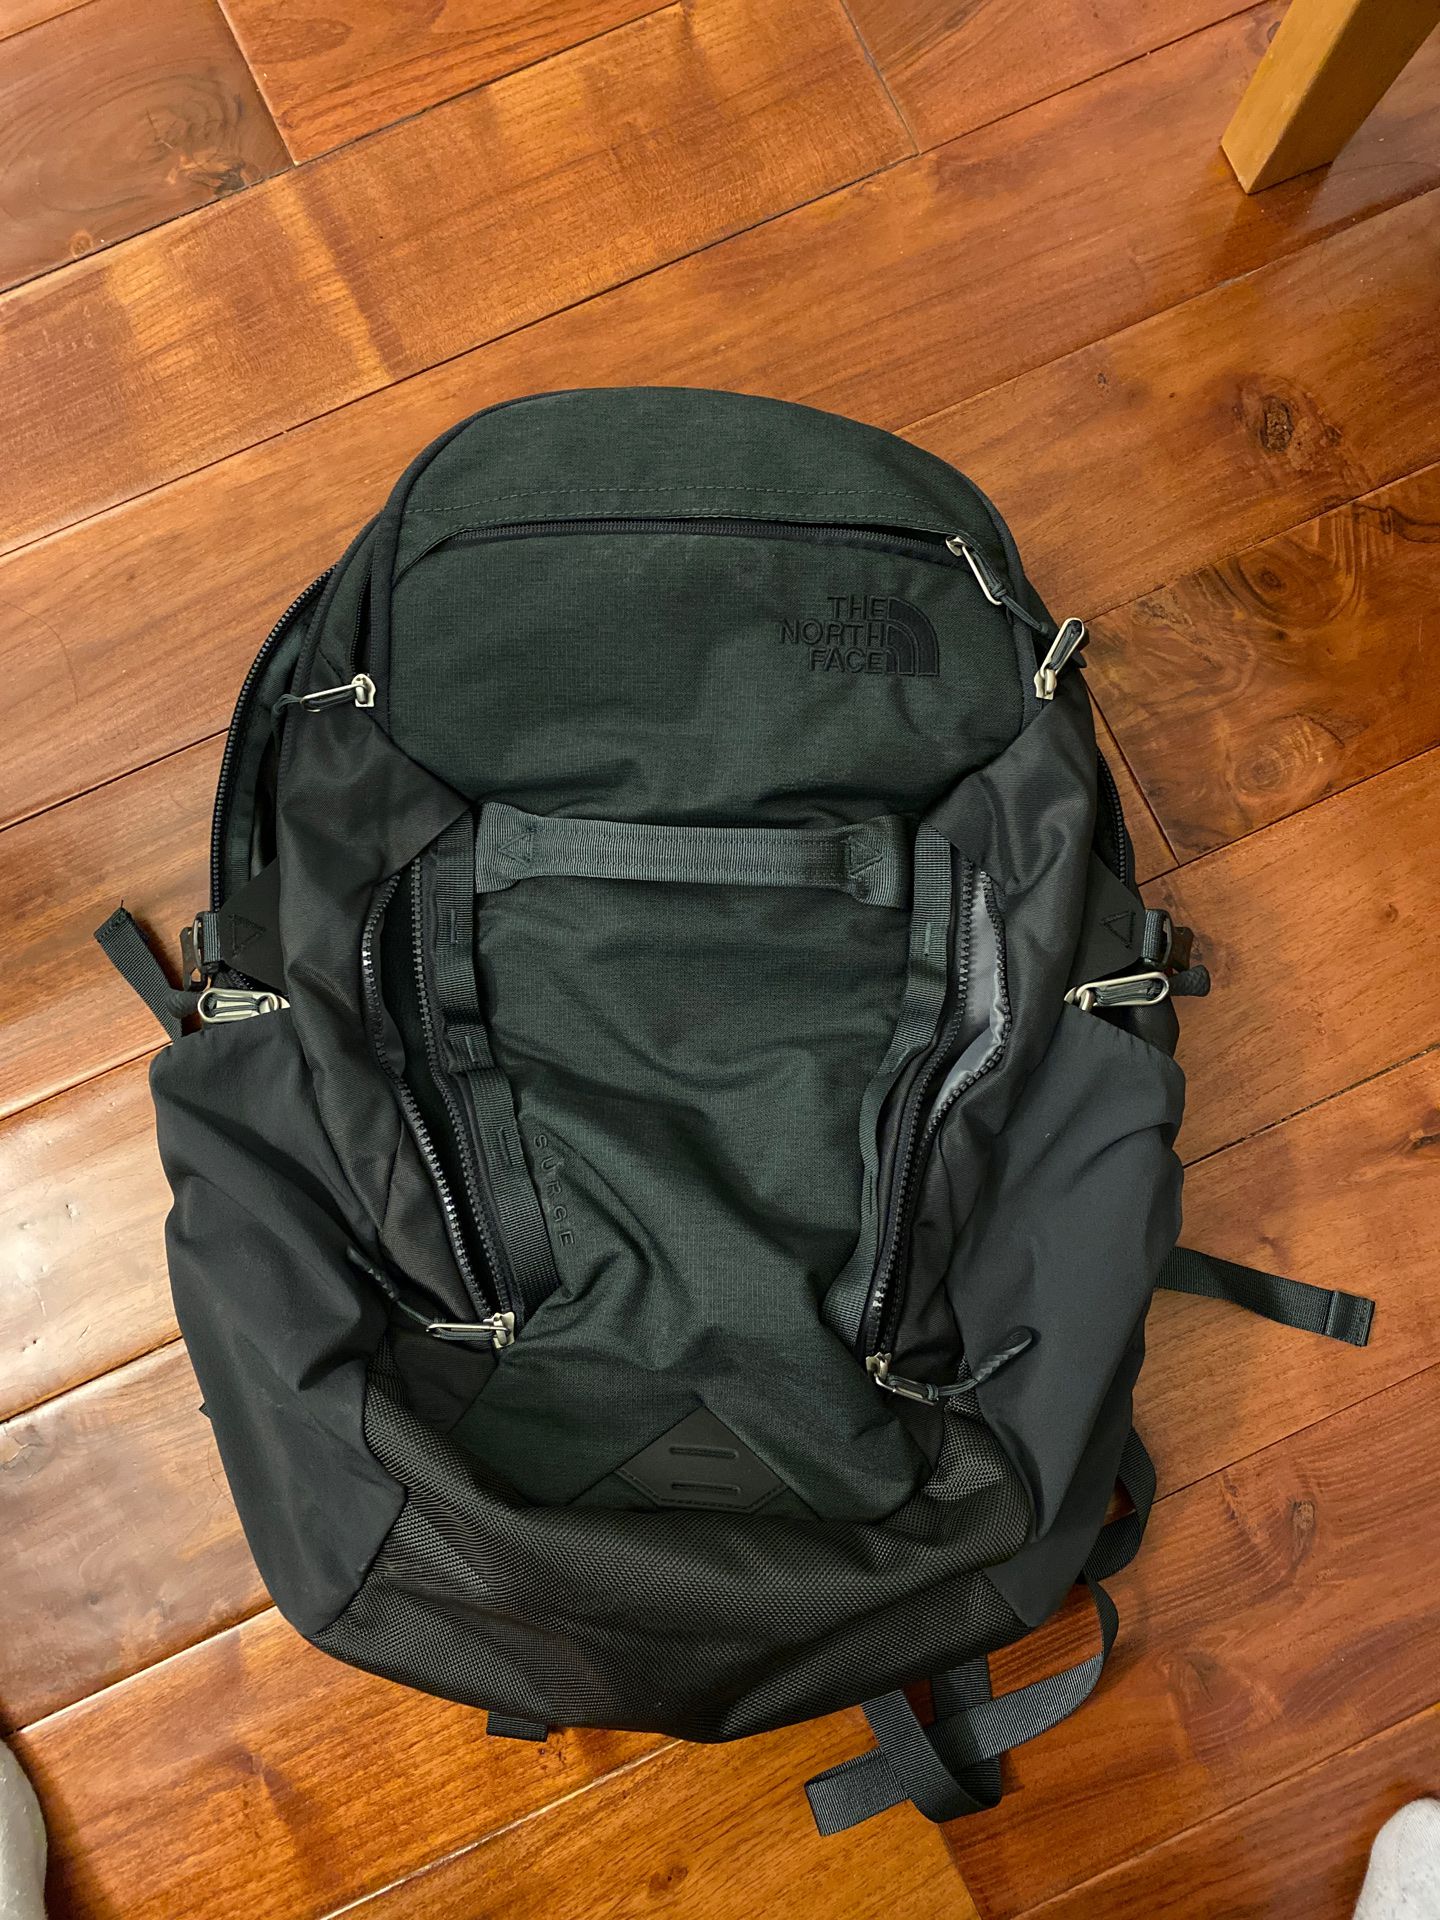 The Northface backpack Surge